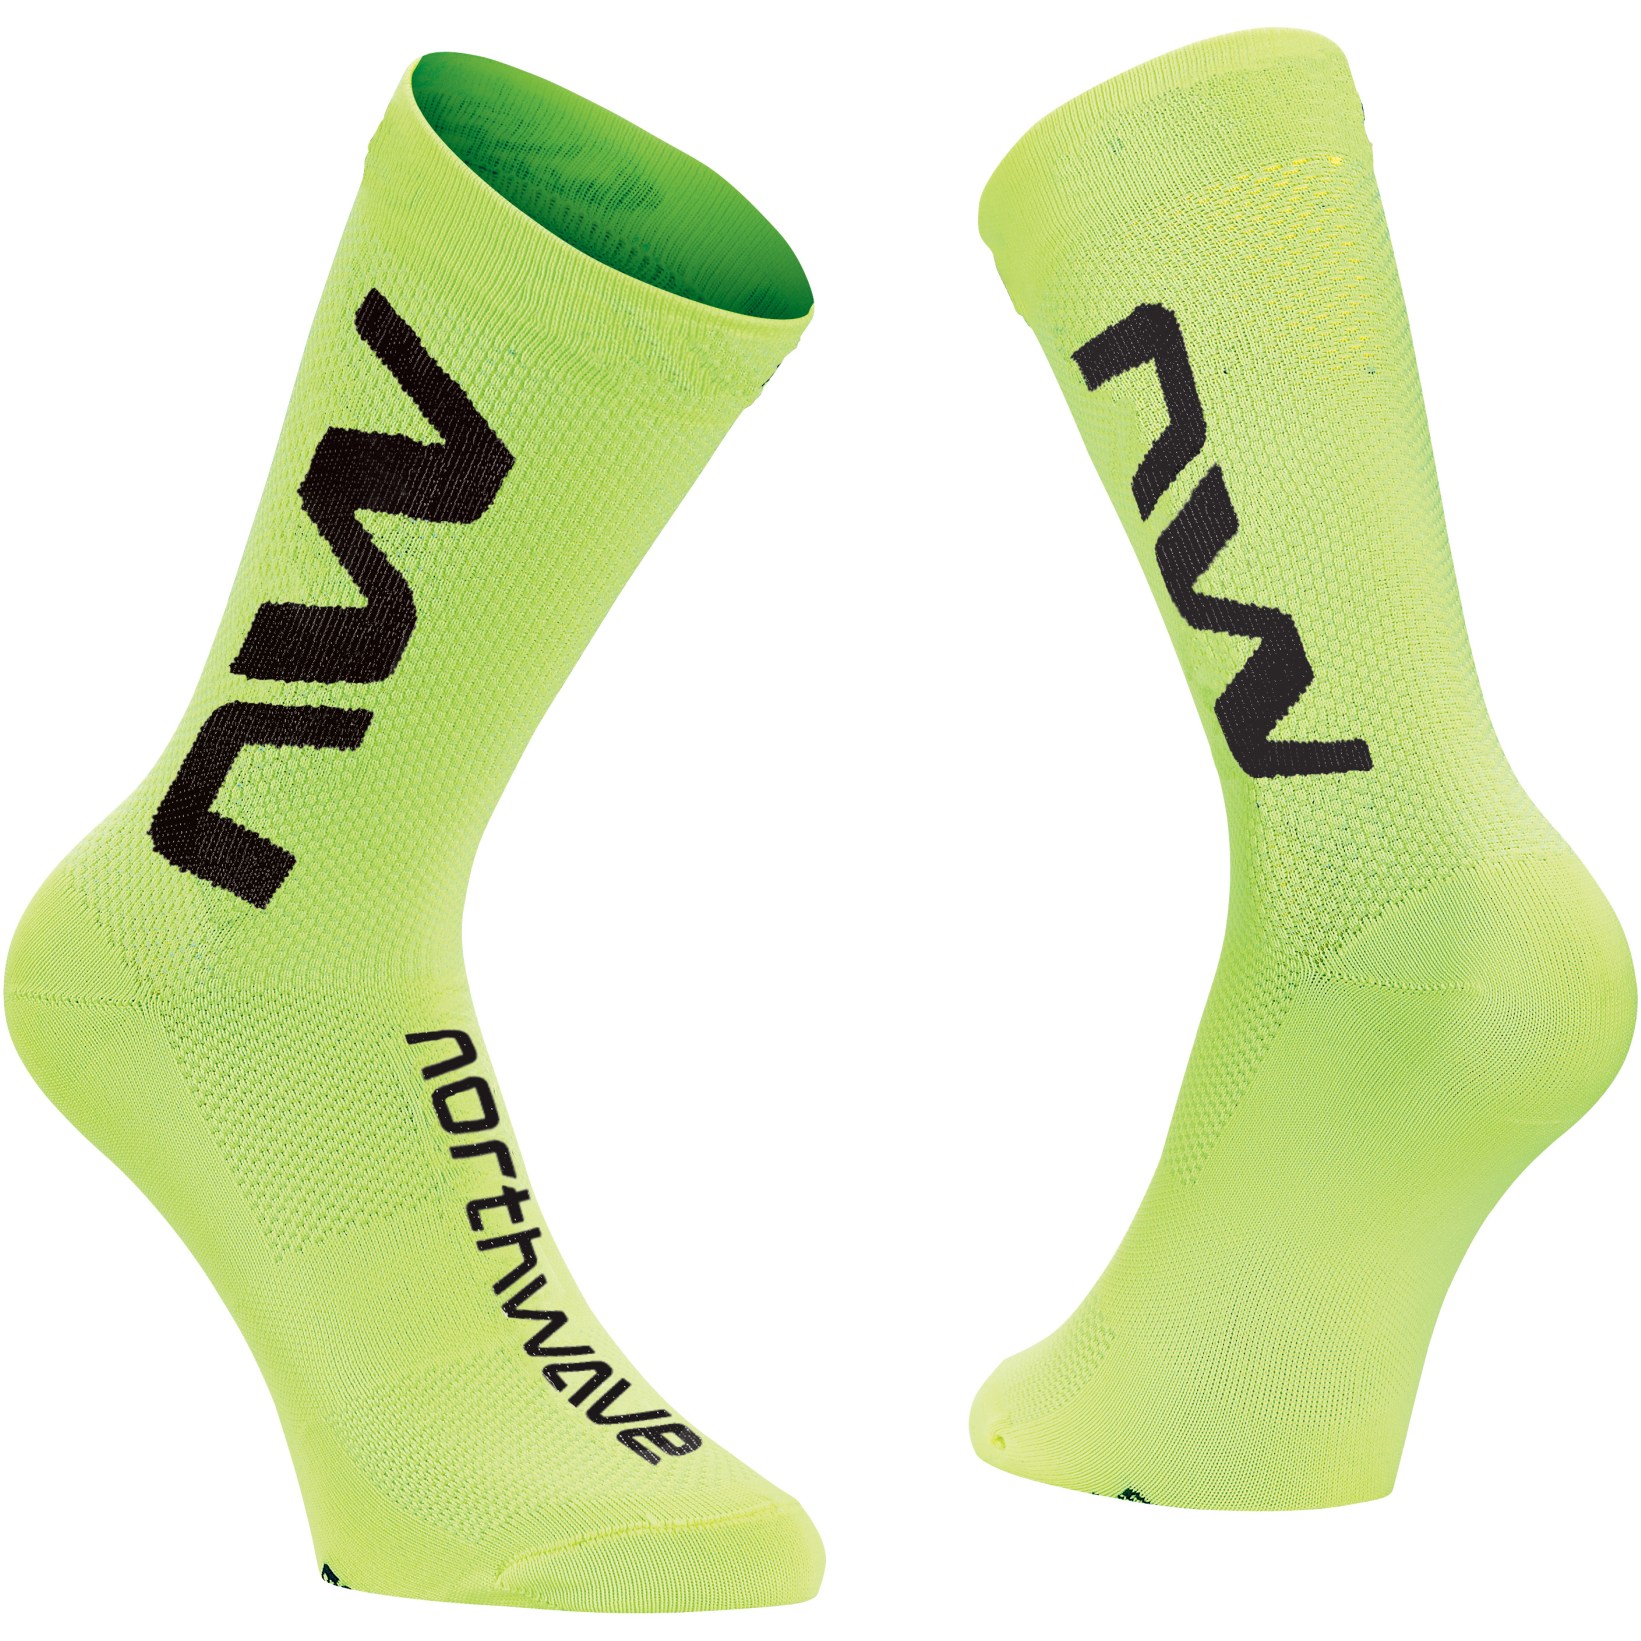 Picture of Northwave Extreme Air Socks - yellow fluo/black 41